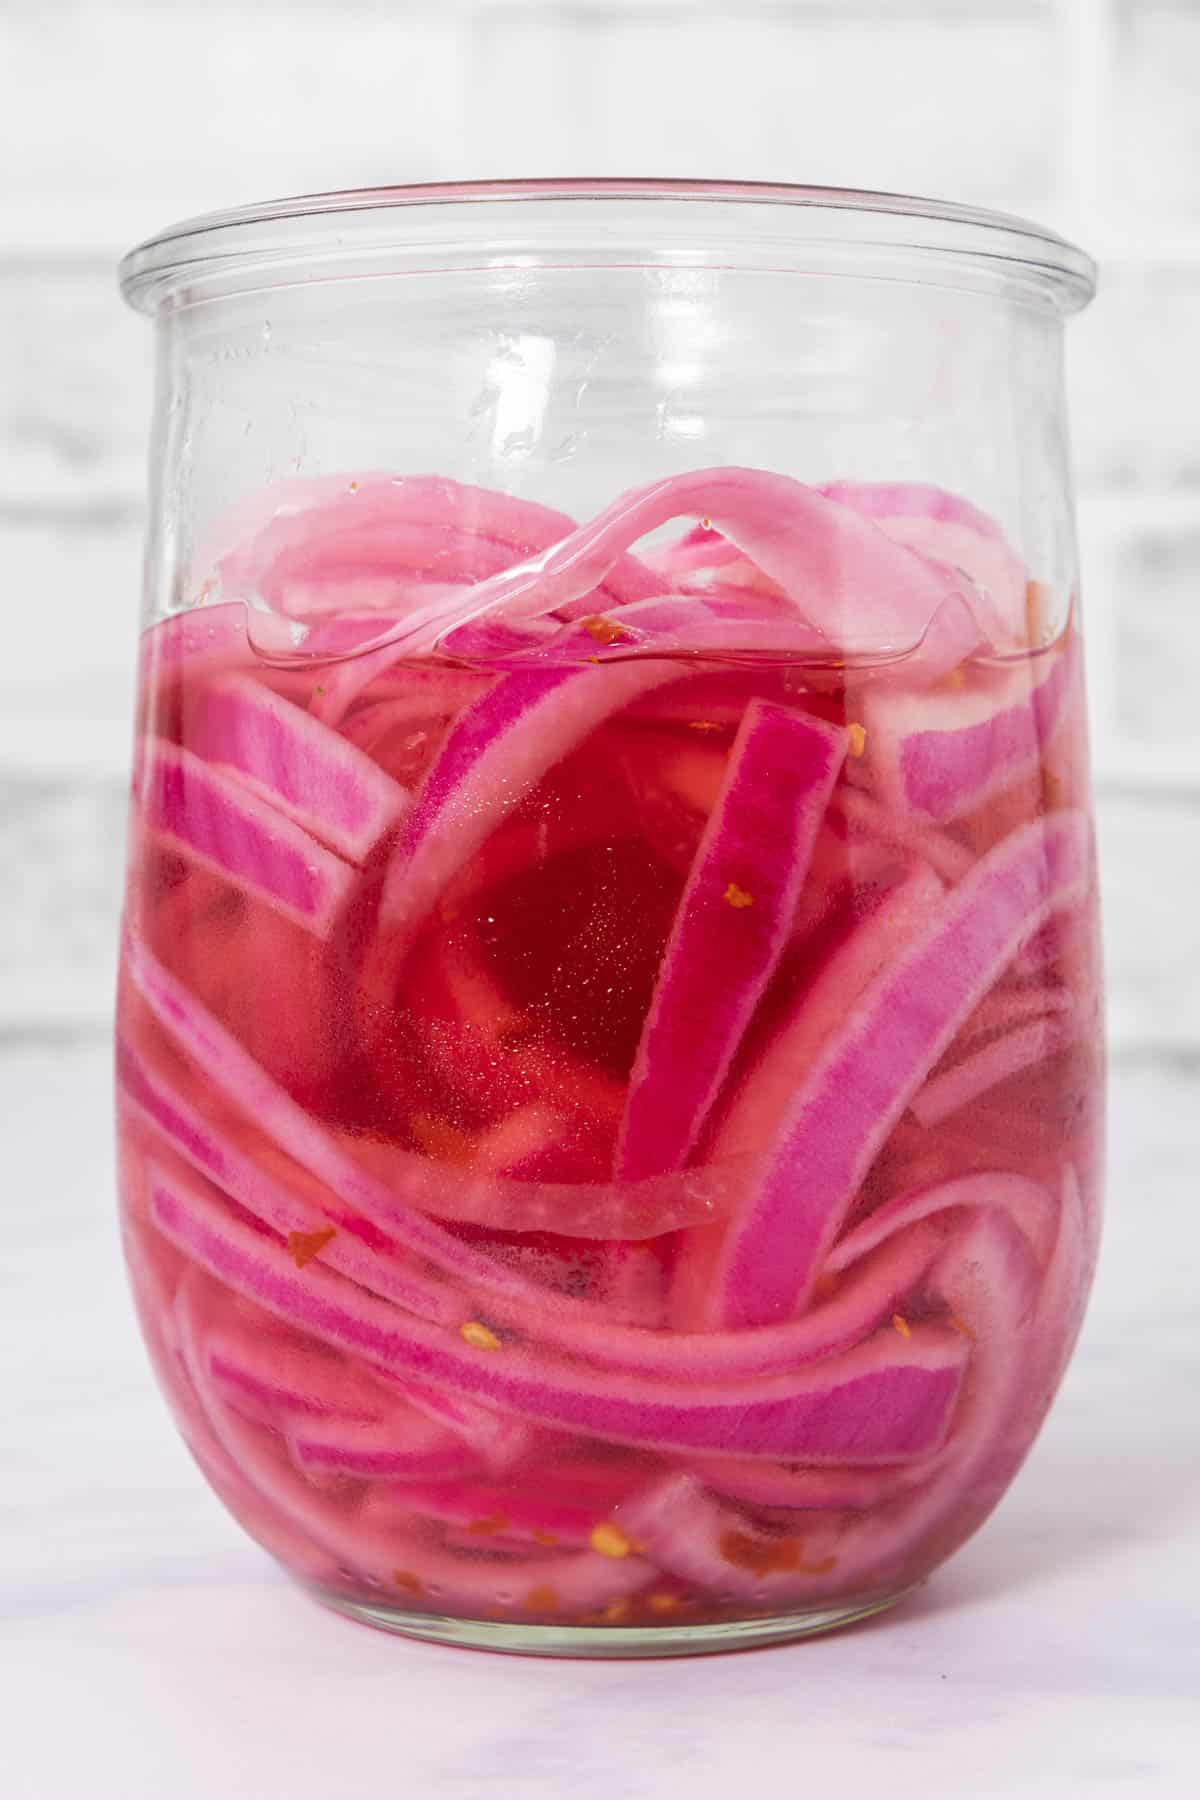 Side view of jar of pickled onions